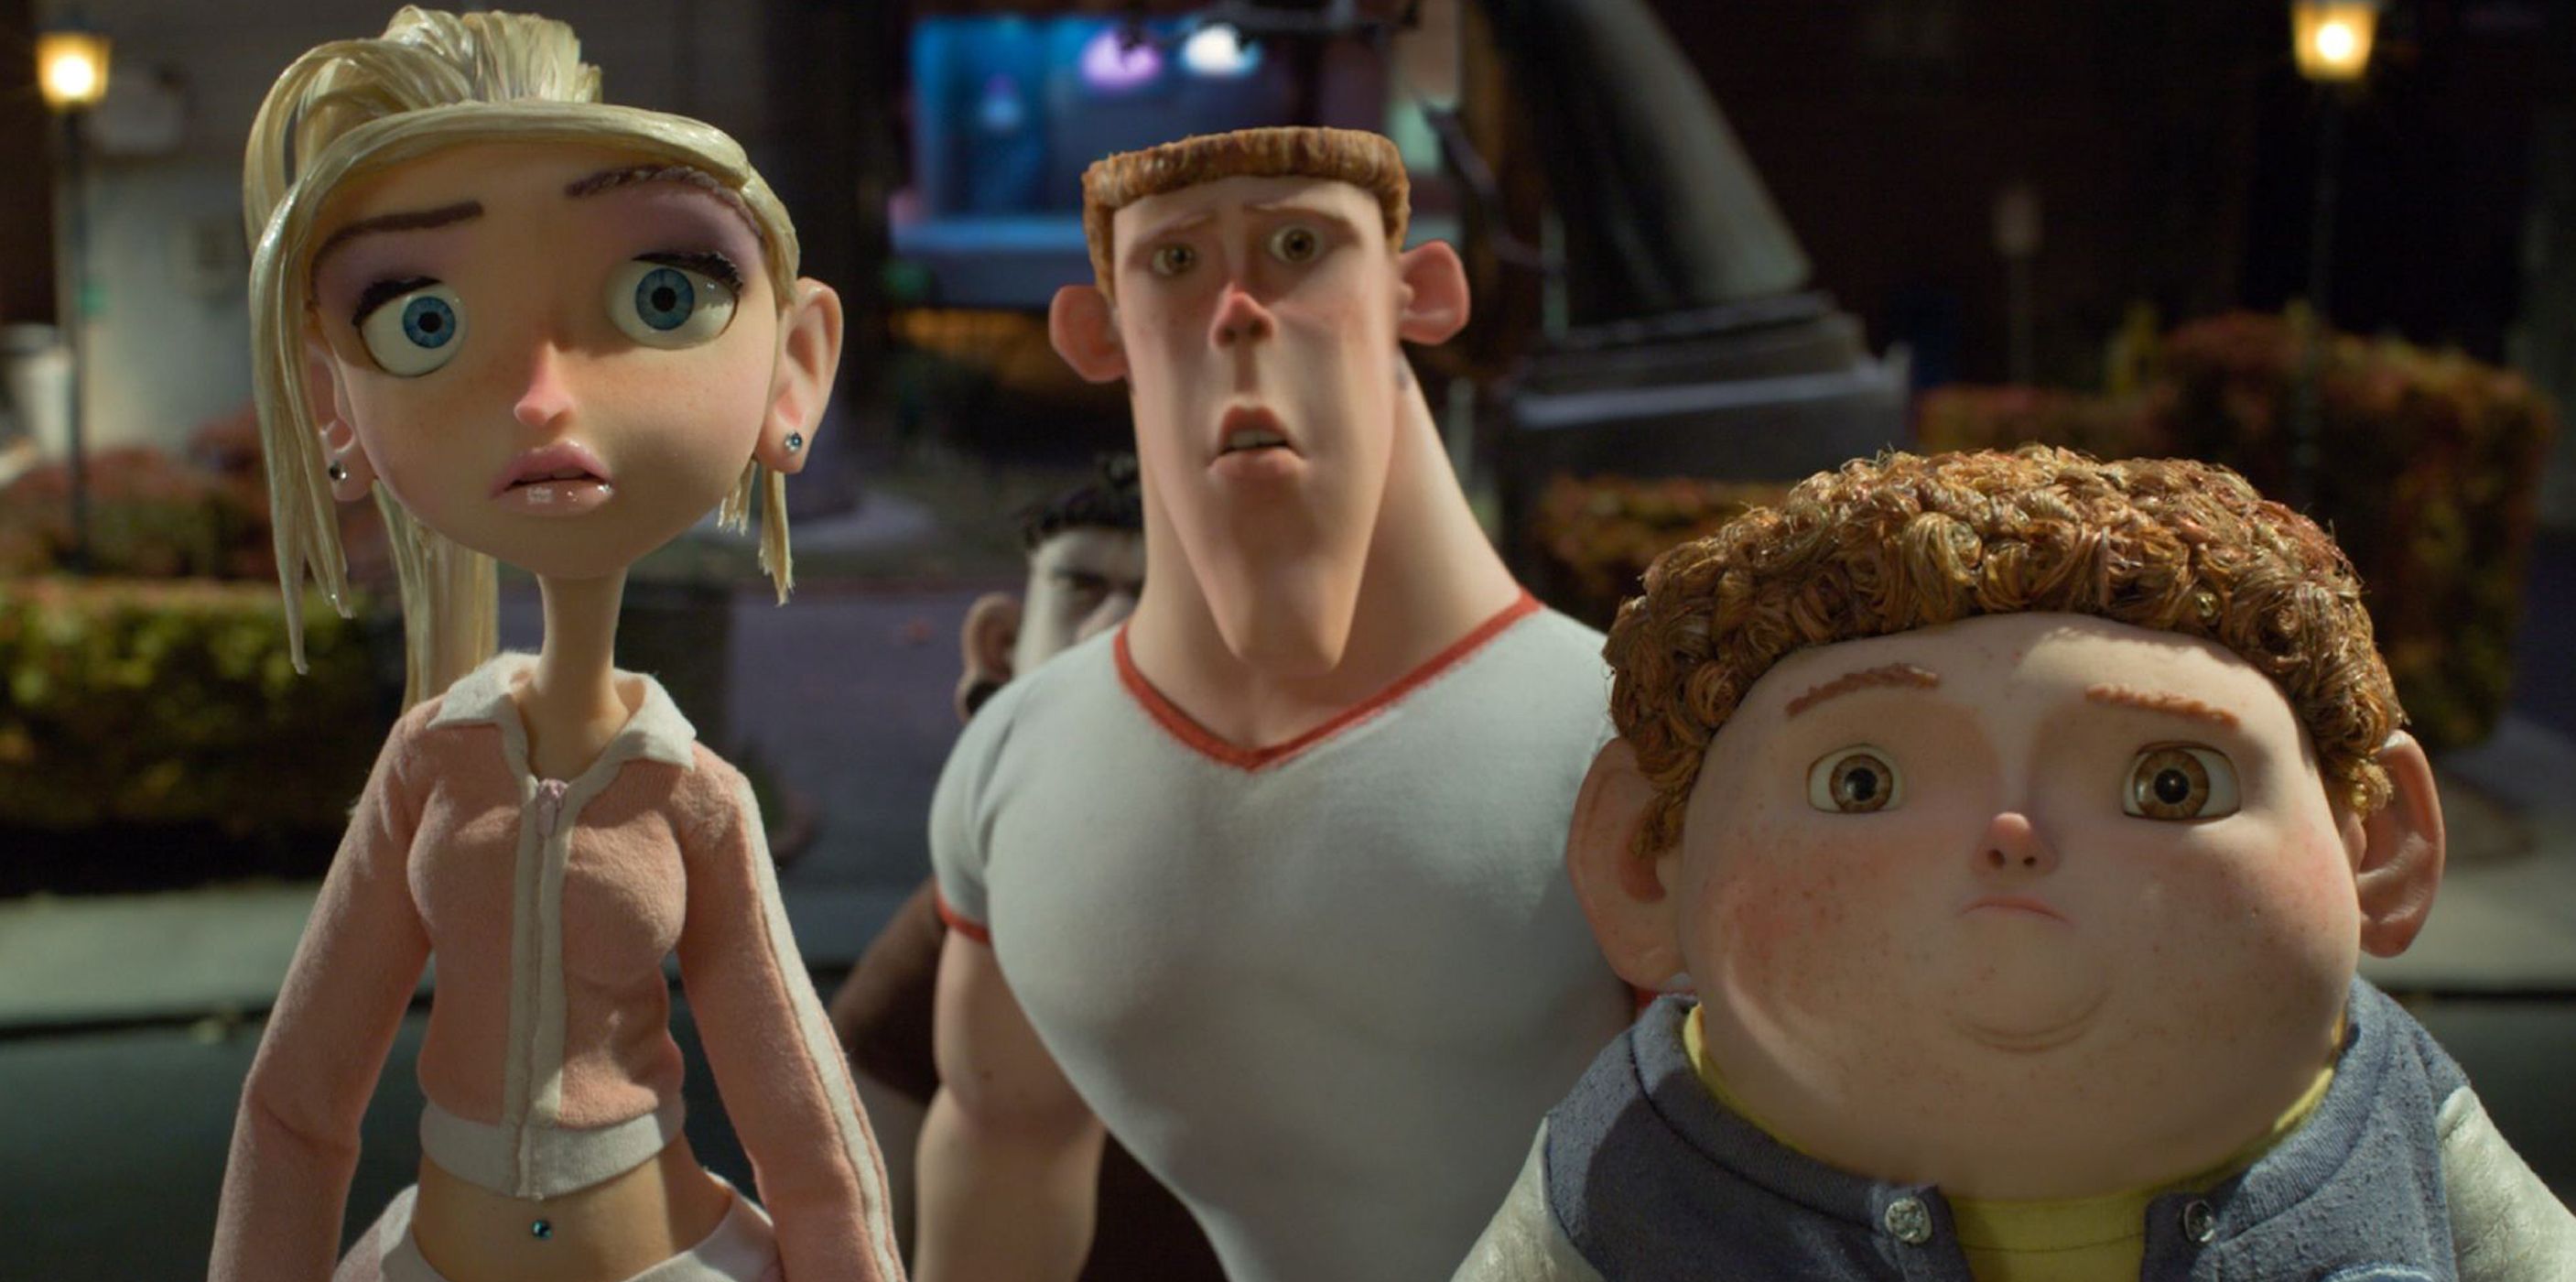 The kids from ParaNorman.